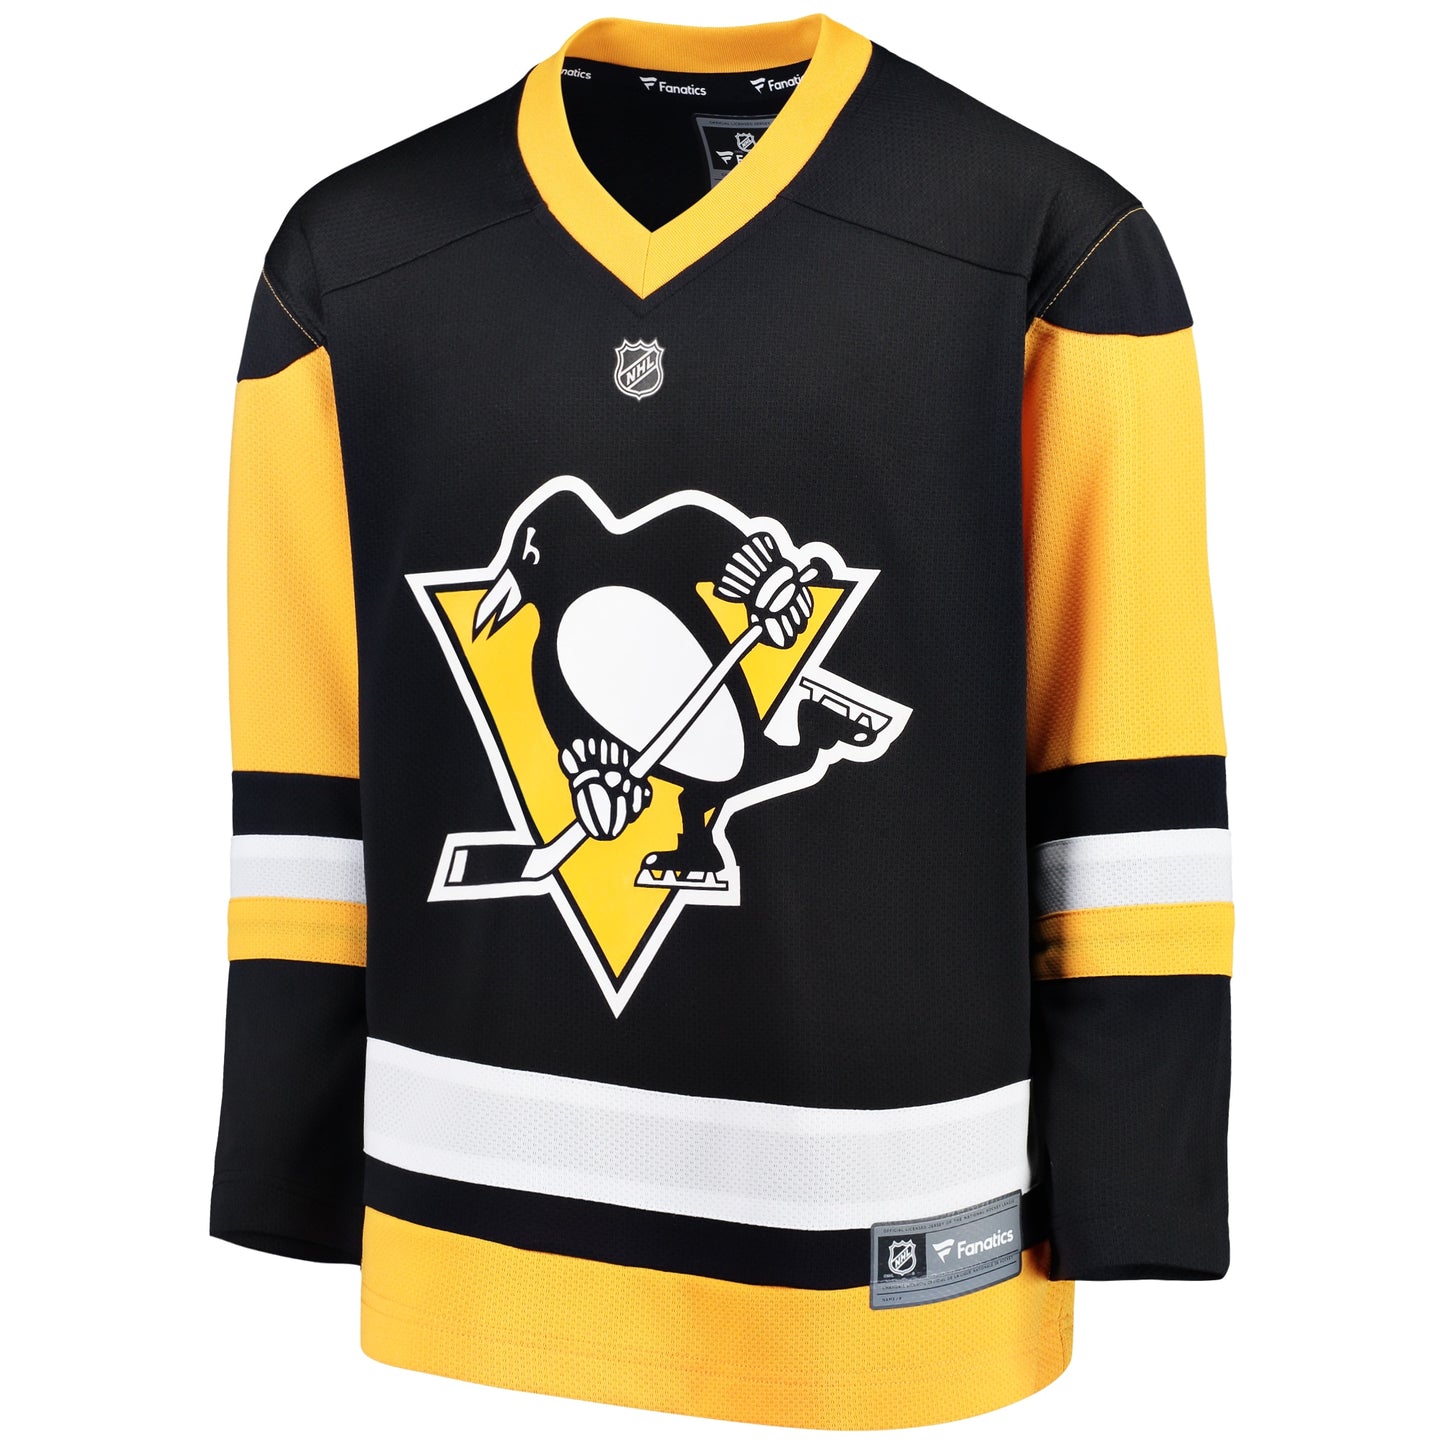 Pittsburgh Penguins Fanatics Branded Youth Home Replica Blank Jersey - Black